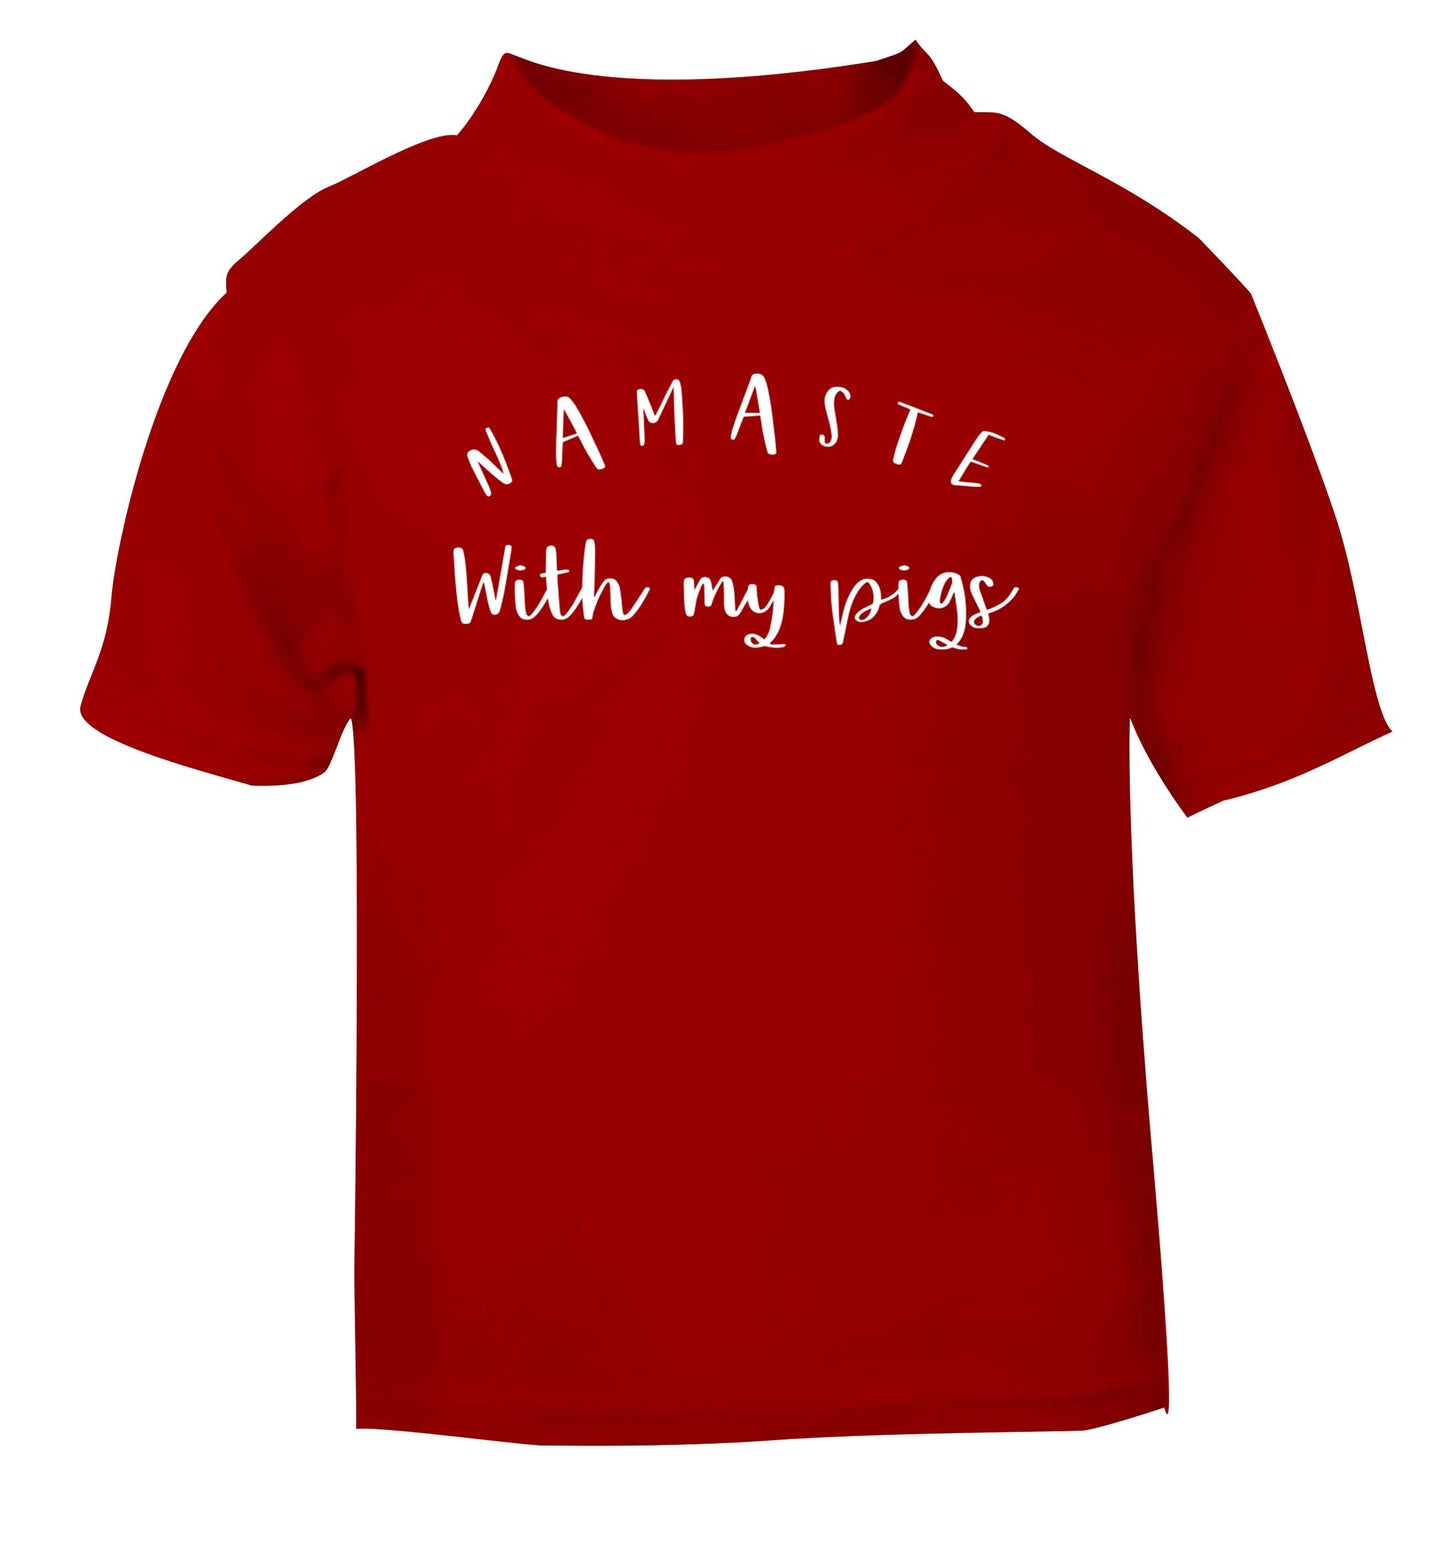 Namaste with my pigs red Baby Toddler Tshirt 2 Years